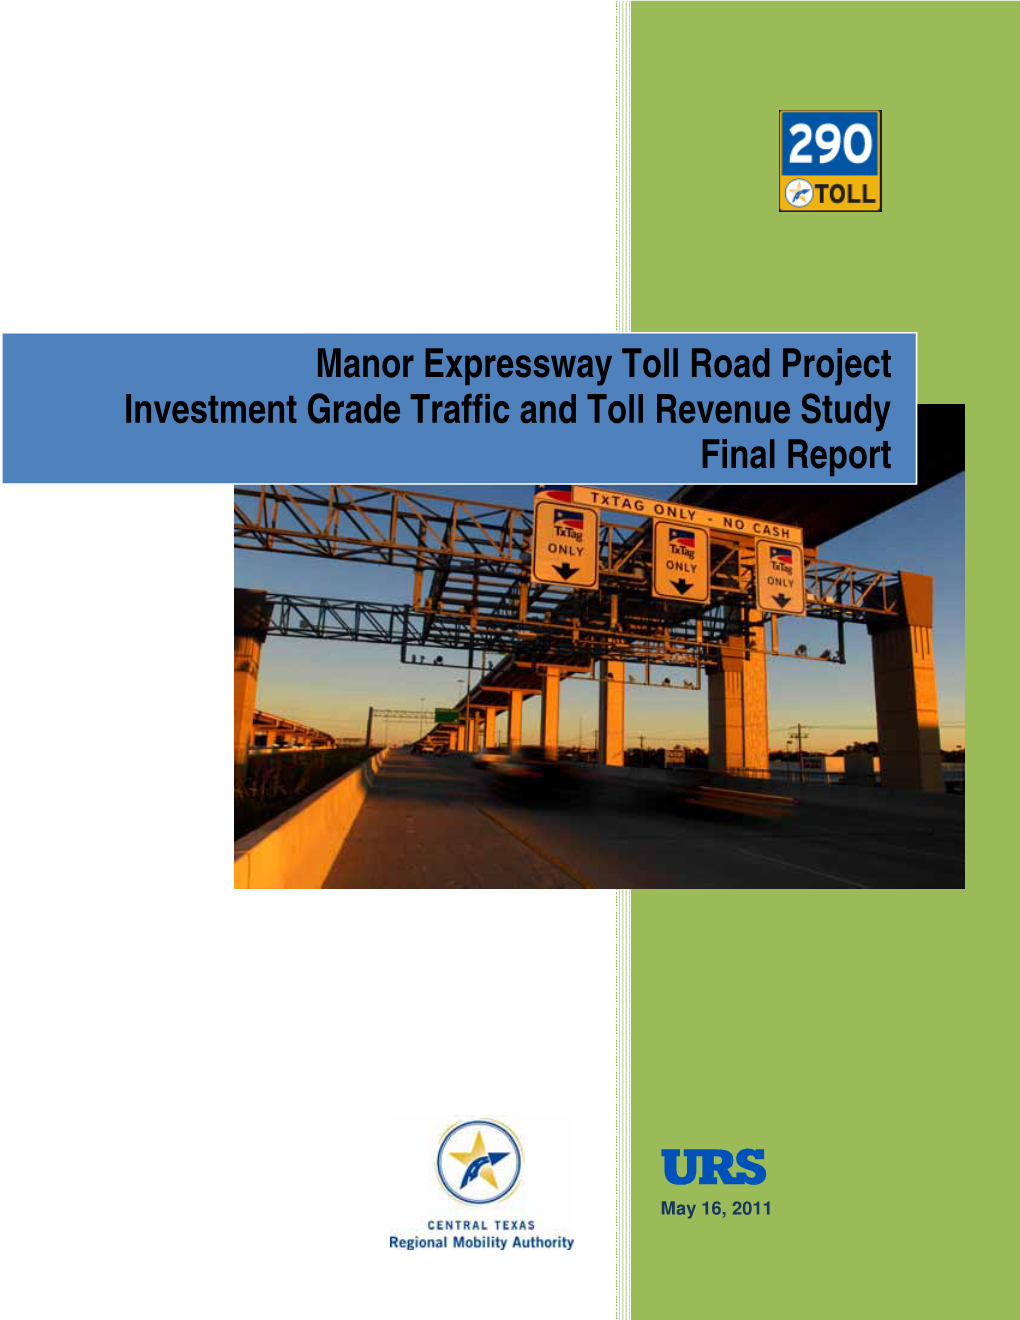 Manor Expressway Toll Road Project Investment Grade Traffic and Toll Revenue Study Final Report